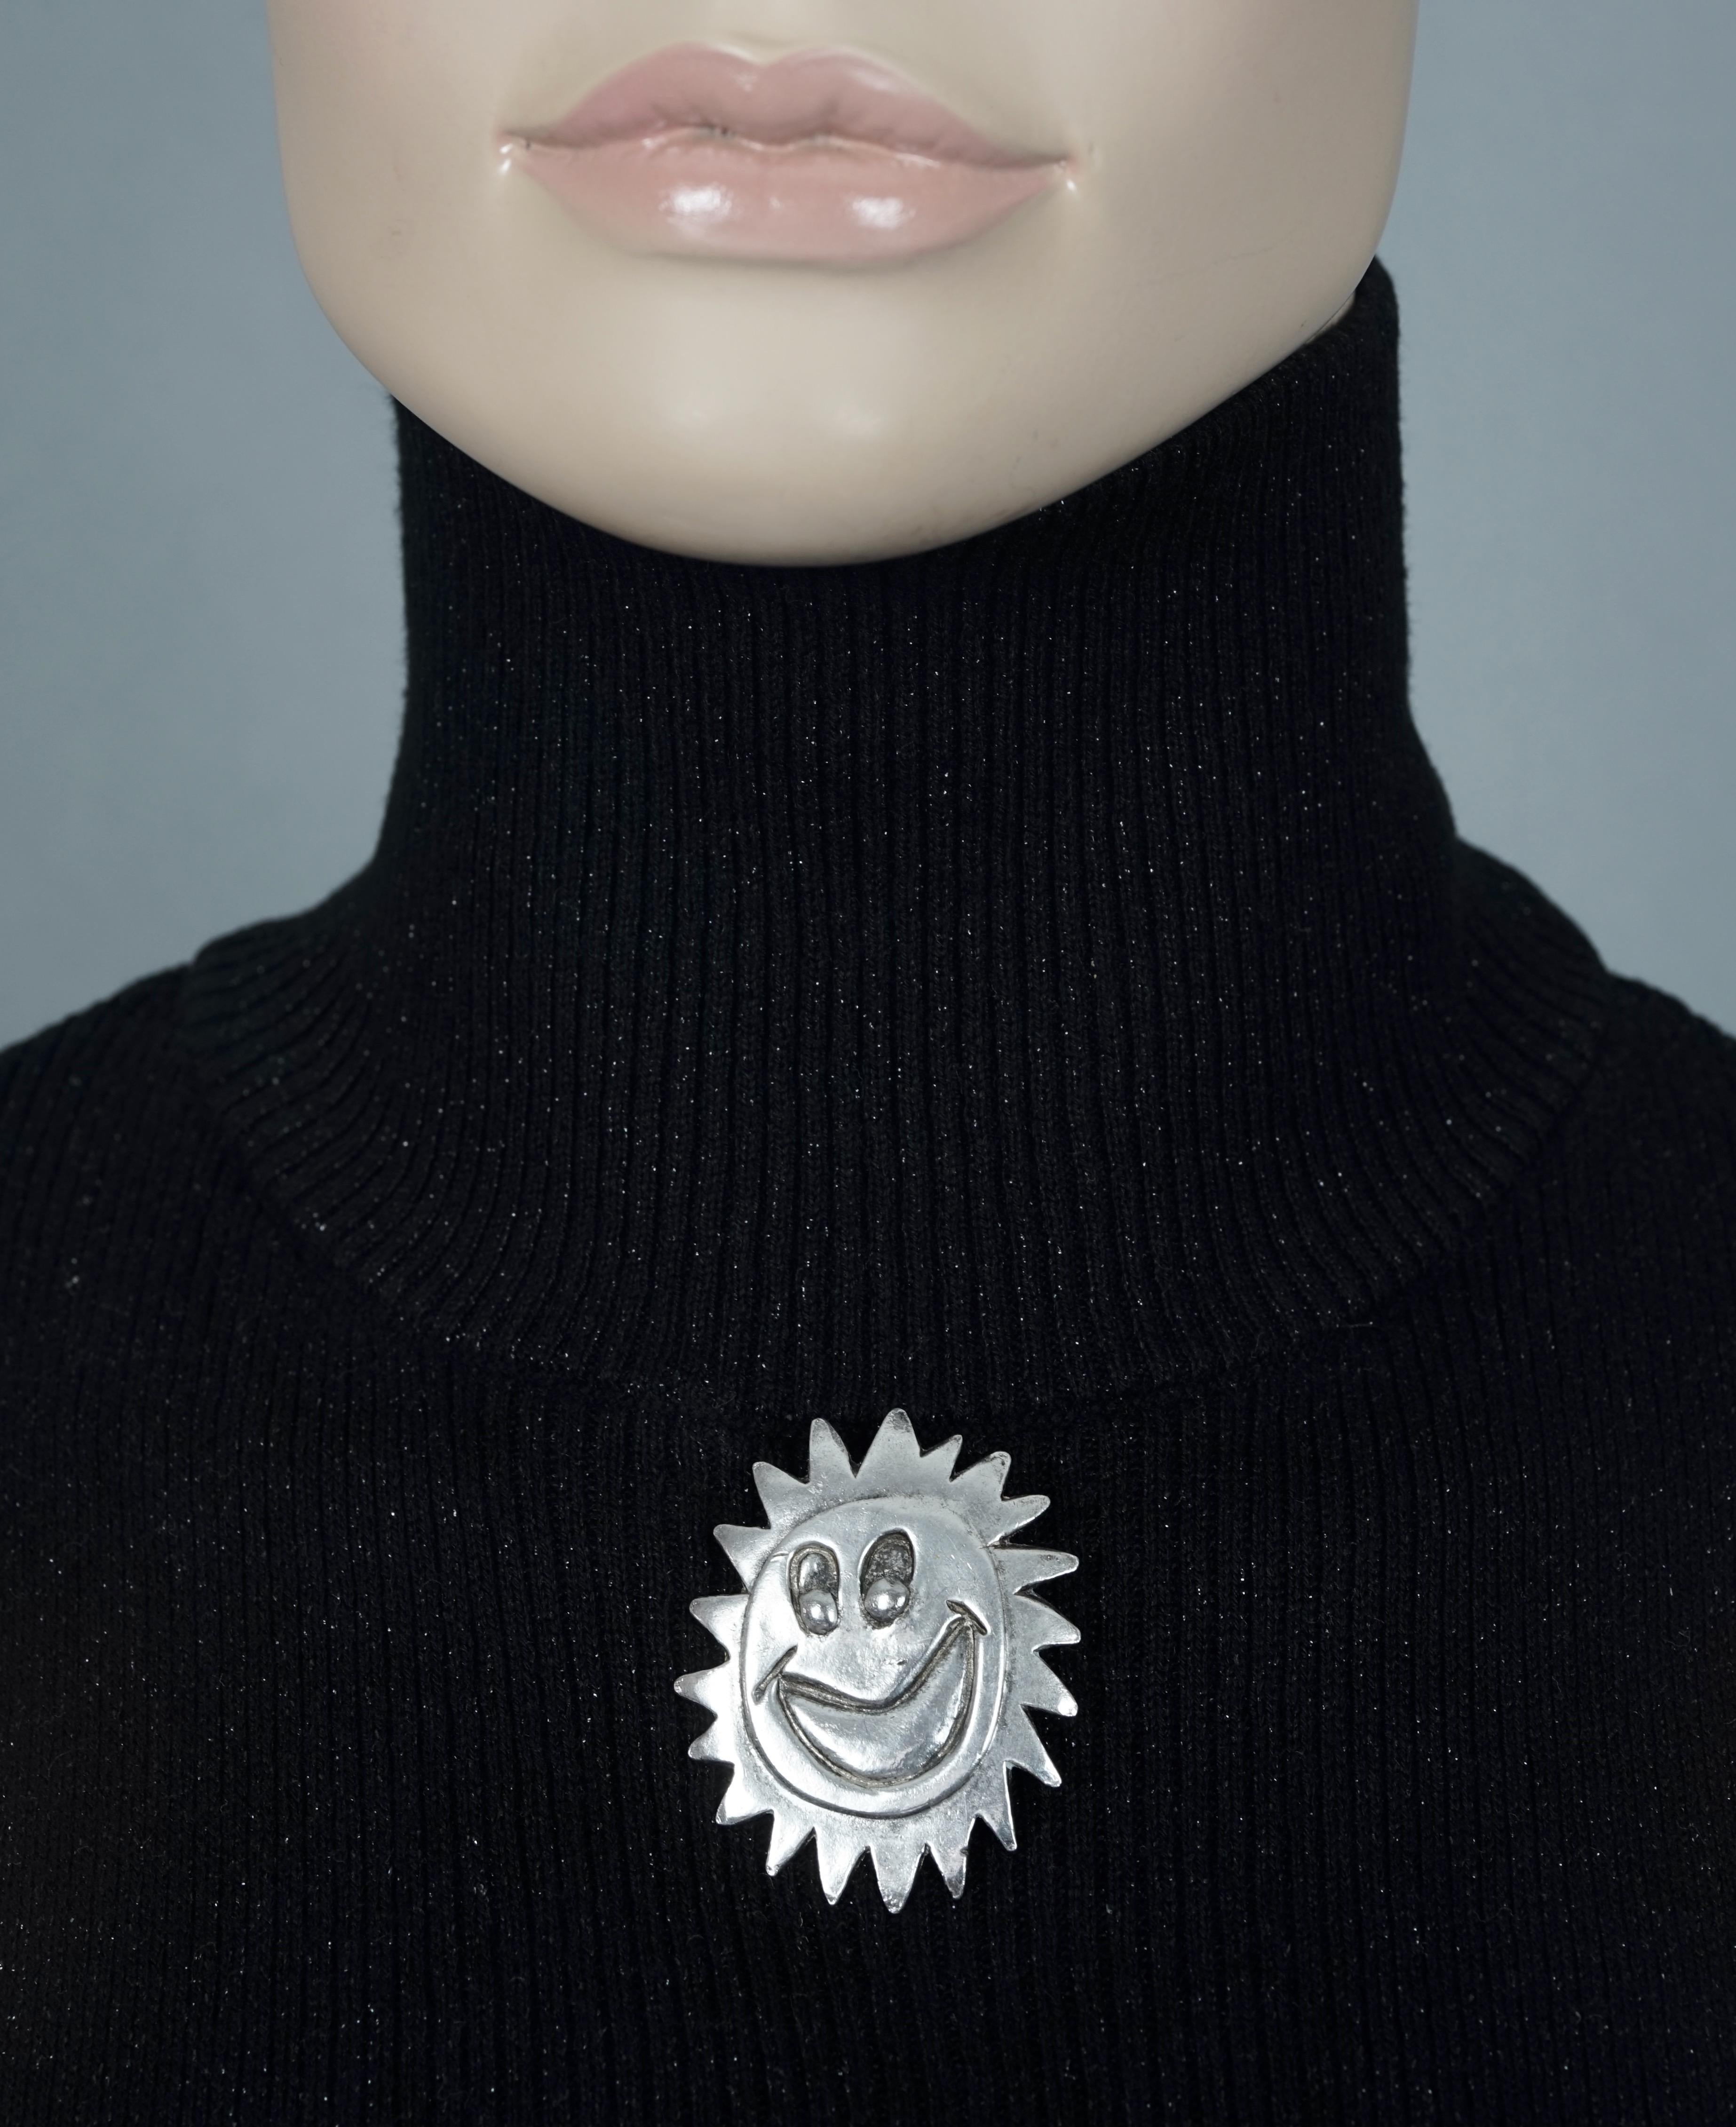 Vintage 1987 BILLY BOY Surreal Smiley Sun Face Silver Brooch

Measurements:
Height: 1.97 inches (5 cm)
Width: 1.61 inches (4.1 cm)

Features:
- 100% Authentic 1987 BILLY BOY.
- Textured surreal smiley sun face brooch.
- Silver tone.
- Signed 1987